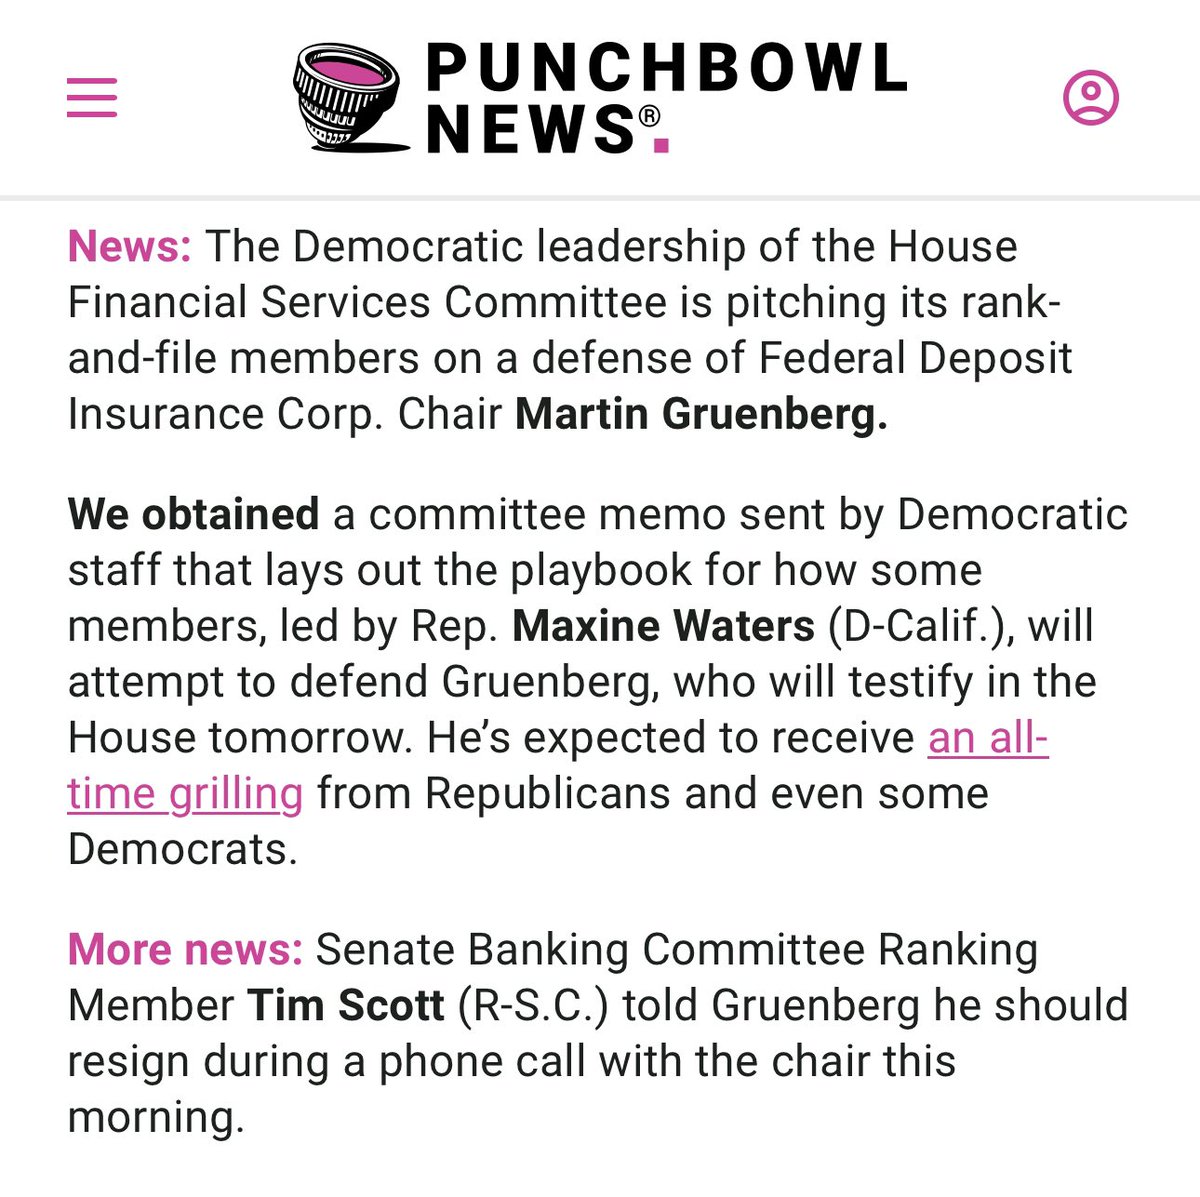 Here's some FDIC news: We've got House Democrats' plan to support Chair Martin Gruenberg tomorrow. Also, Sen. Tim Scott (R-SC) used a phone call this morning requested by Gruenberg to tell the FDIC chair to resign. Just a loooot of news here: punchbowl.news/archive/51424-…